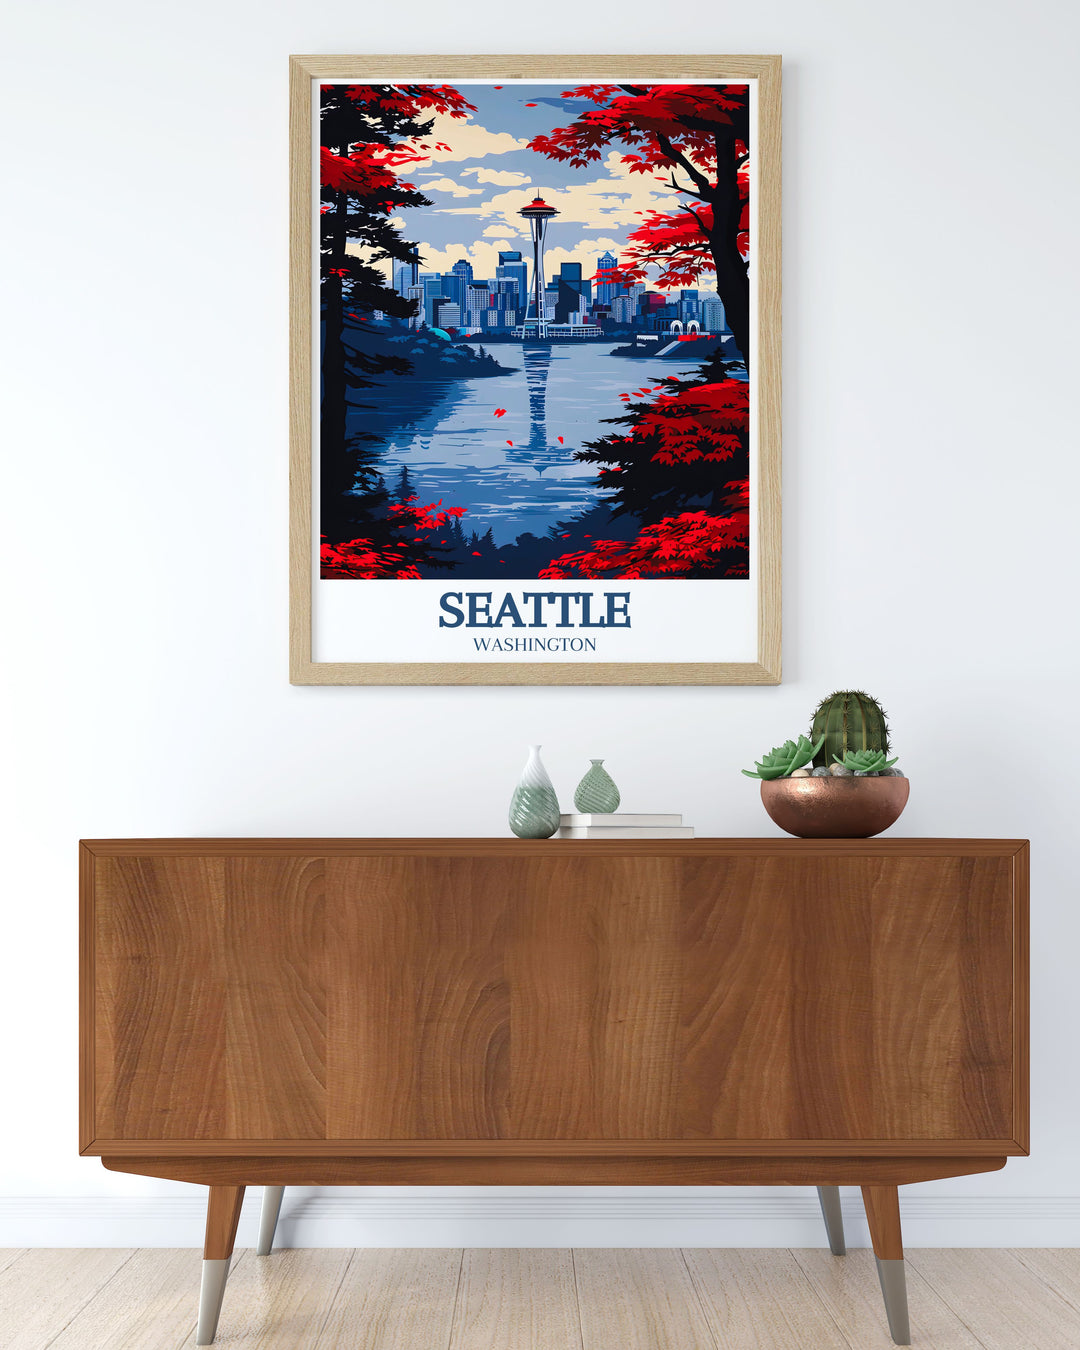 The Summit at Snoqualmie and Seattles Space Needle are beautifully depicted in this poster, celebrating the iconic landmarks and winter sports opportunities from the city to the Cascade Range, ideal for skiing enthusiasts.